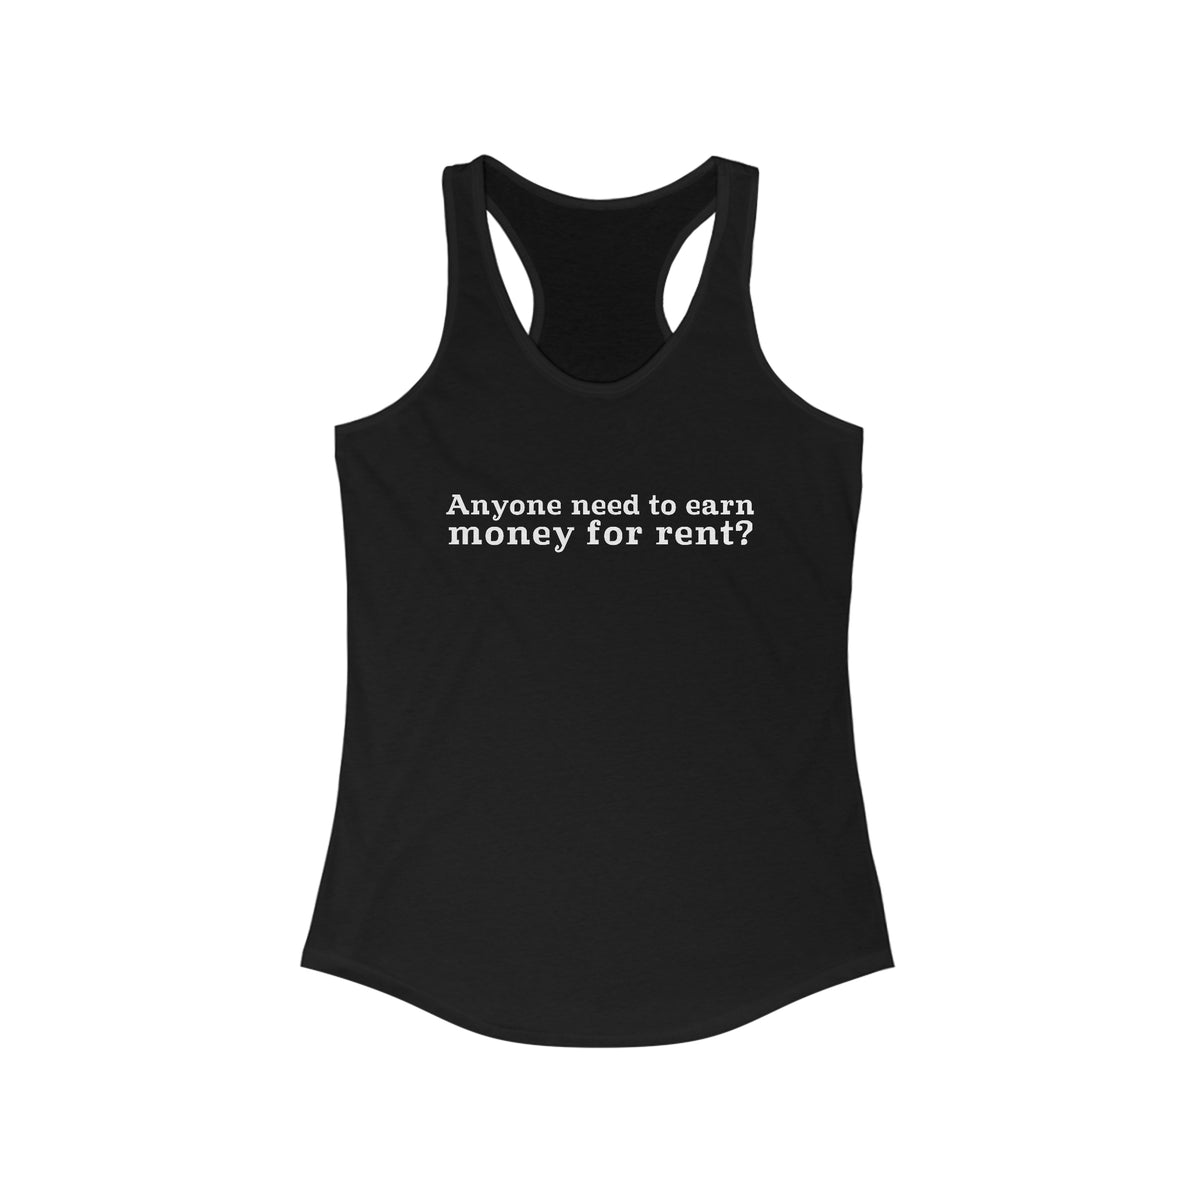 Anyone Need To Earn Money For Rent? - Women’s Racerback Tank